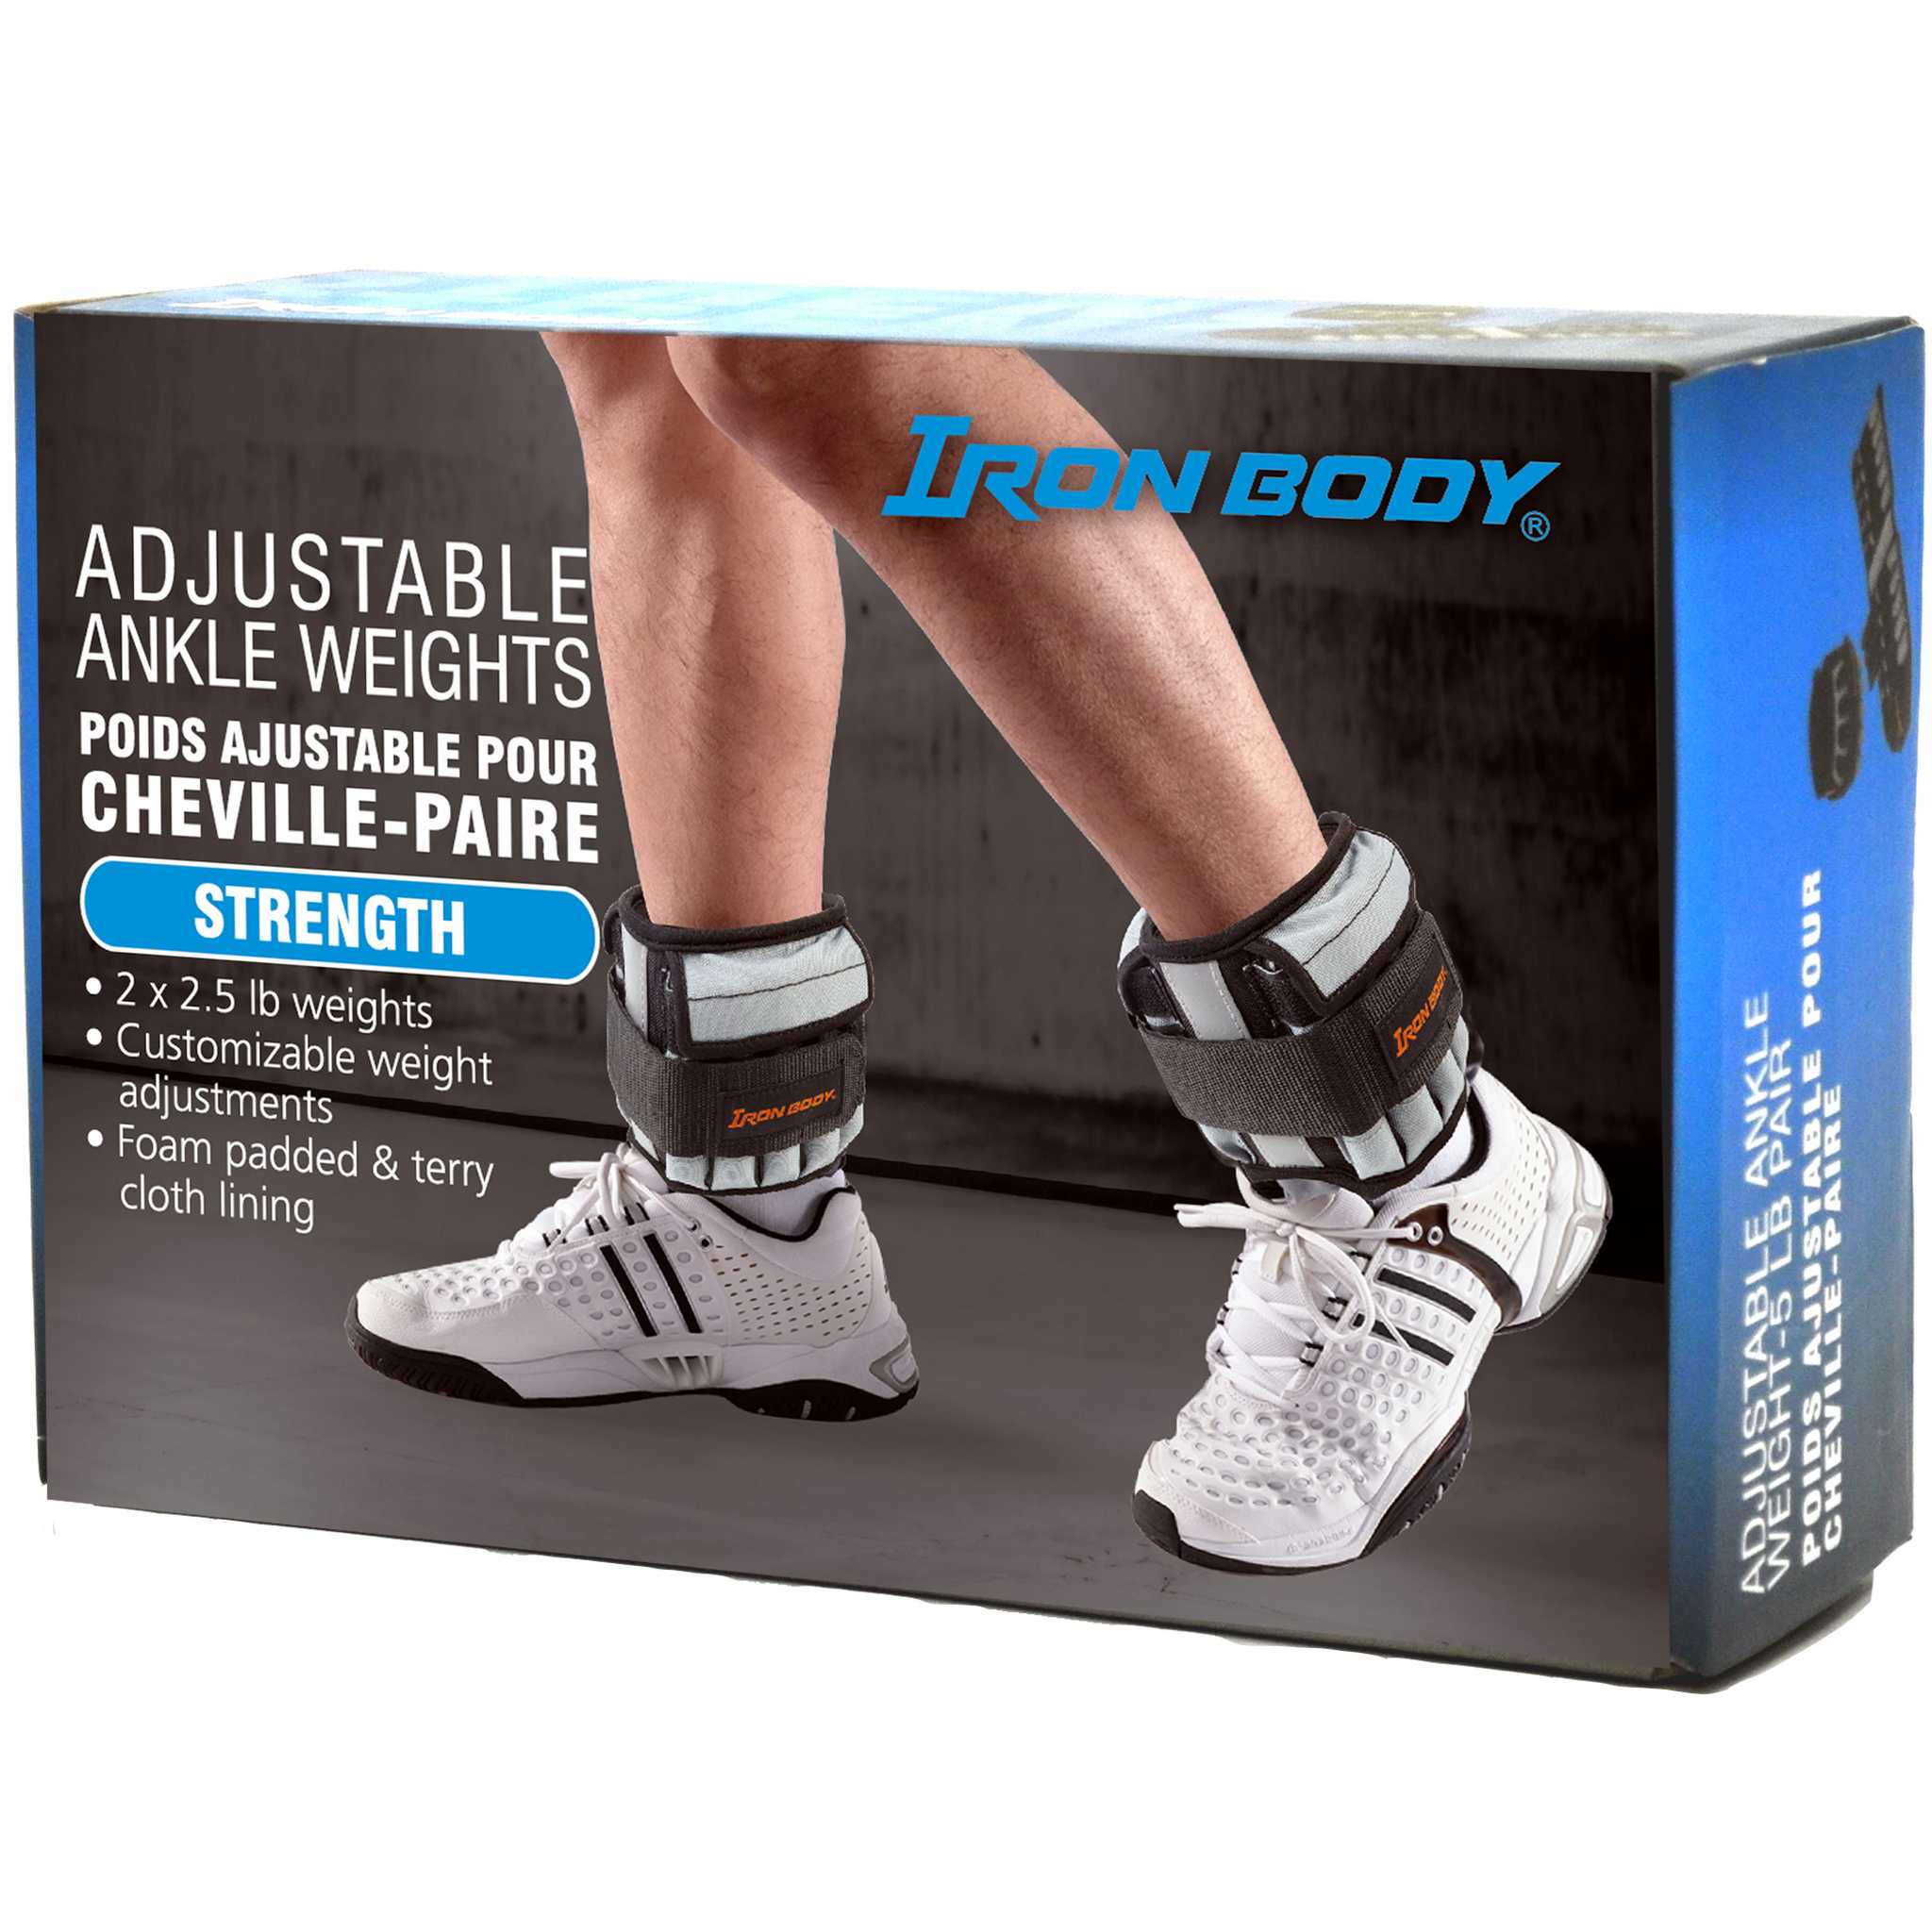 Deluxe Adjustable Ankle Weights, Available in 5 lb. (2 x 2.5 lb.) or 10 lb. Pairs (2 x 5 lb.)